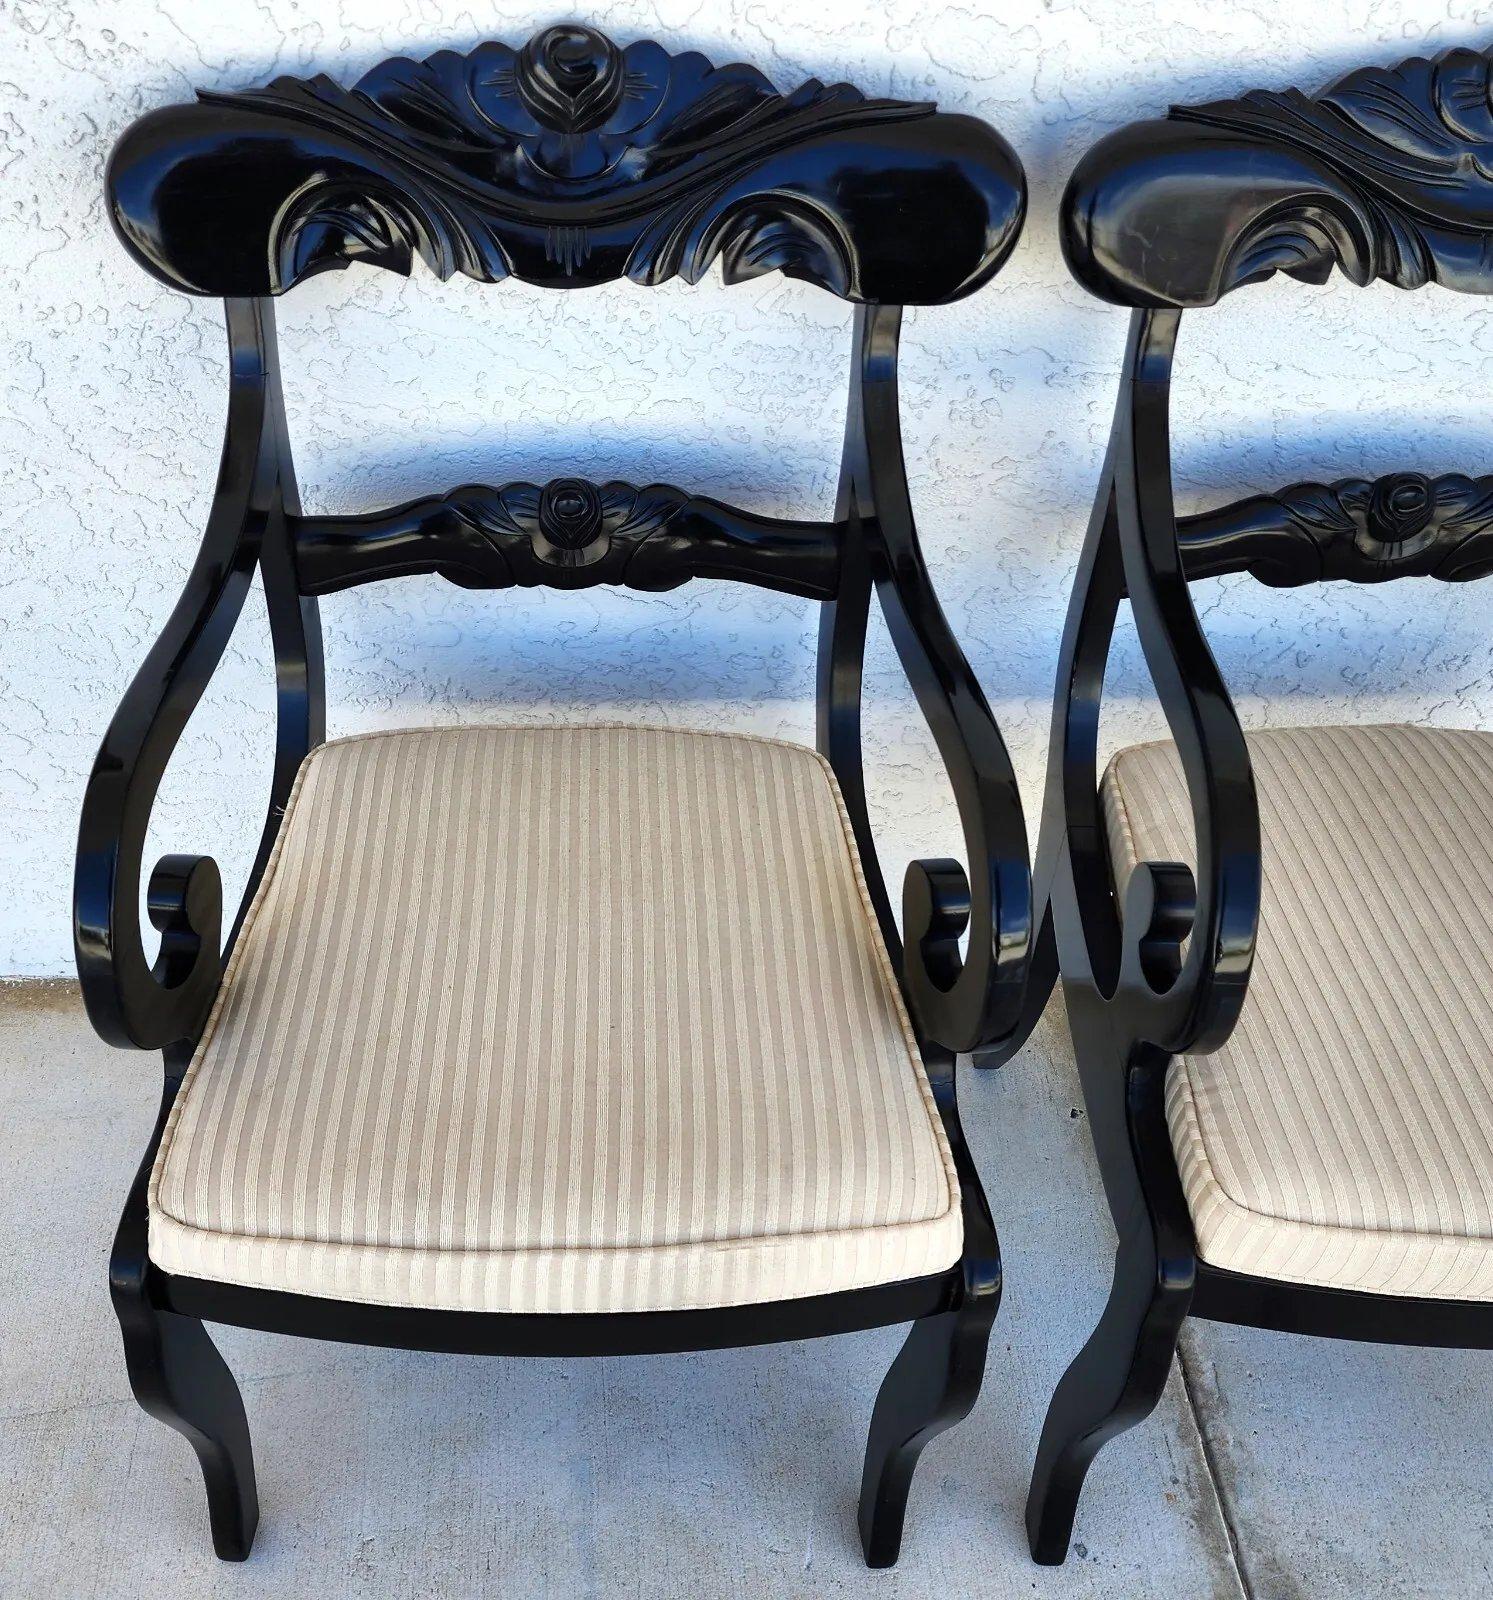 For FULL item description click on CONTINUE READING at the bottom of this page.

Offering One Of Our Recent Palm Beach Estate Fine Furniture Acquisitions Of A
Pair of English Regency Scroll Arm Ebonized Dining Accent Chairs 
With wonderful